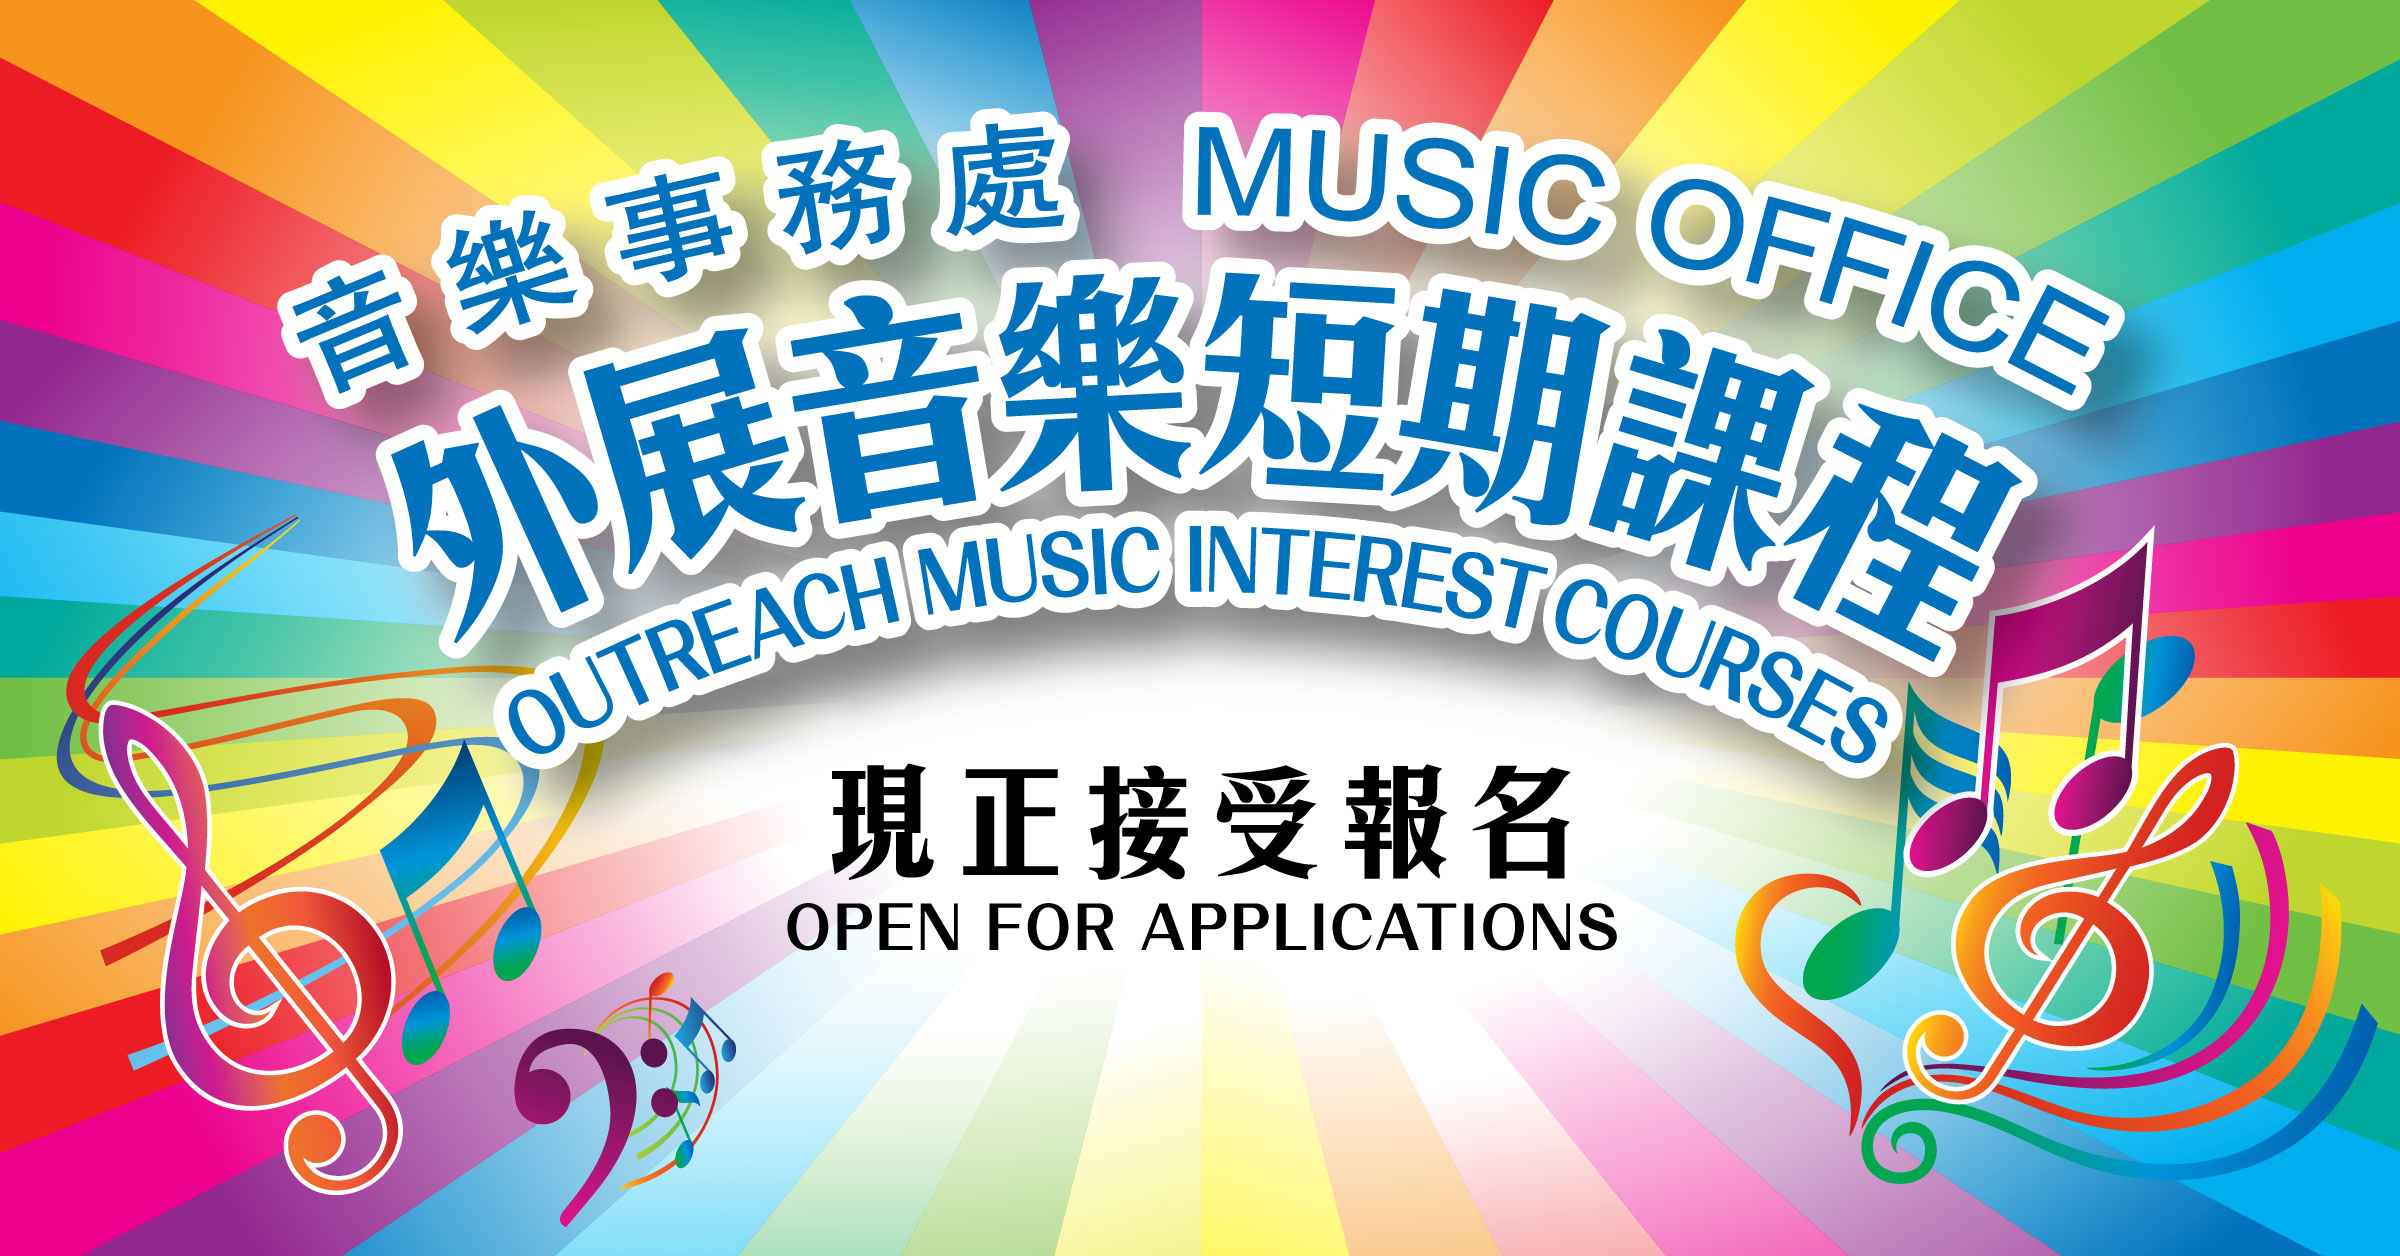 Outreach Music Interest Courses: Applications close on 17 Jan